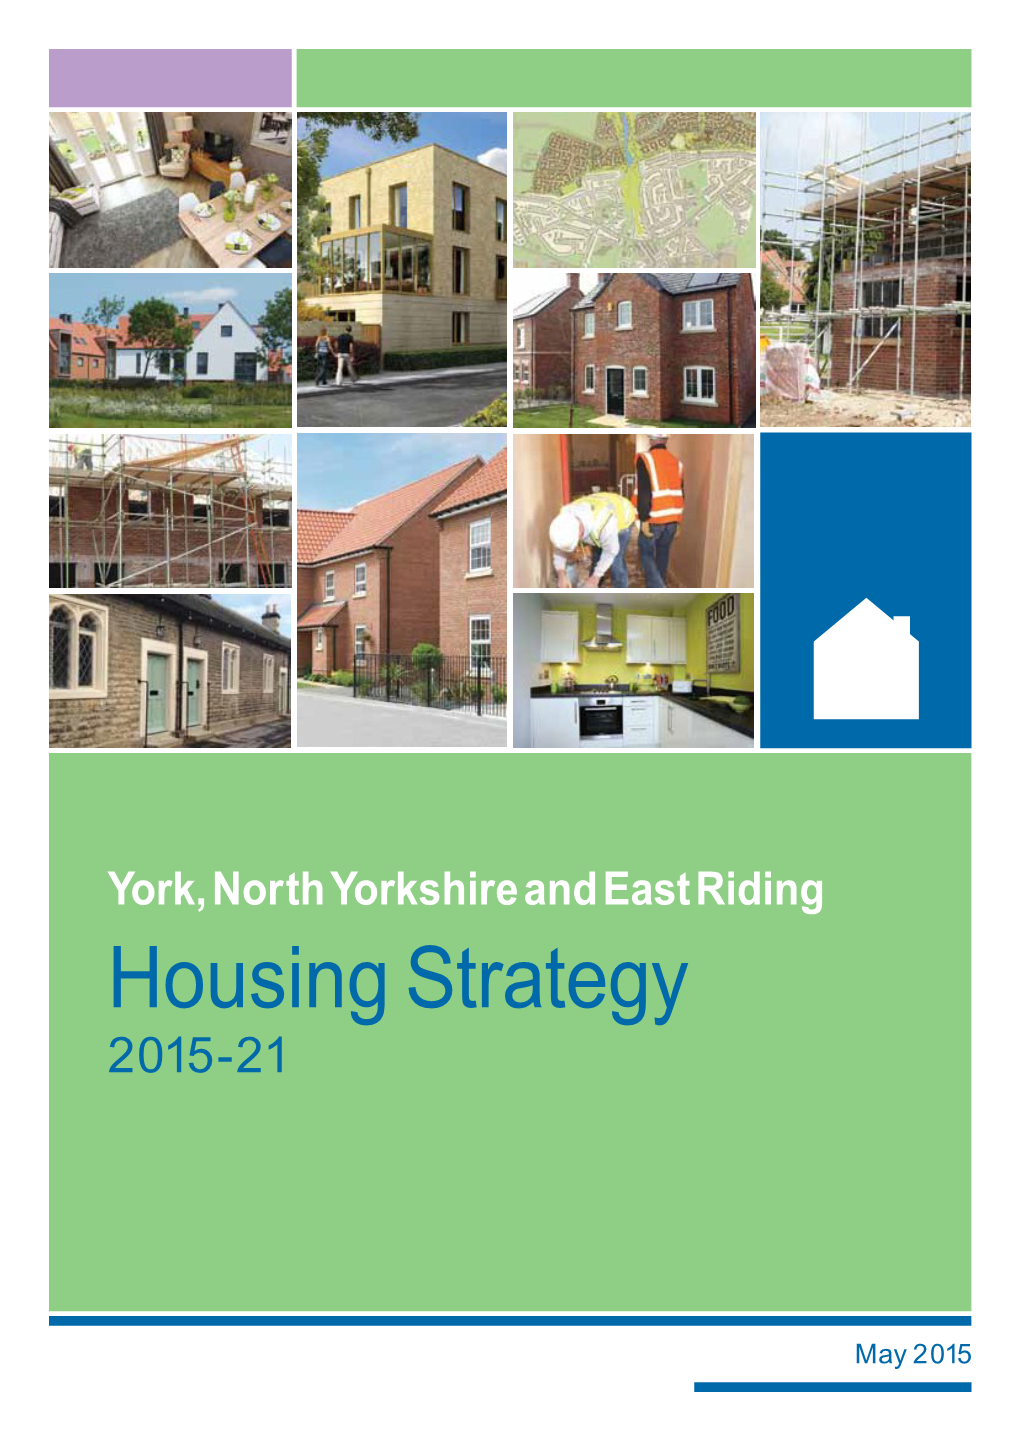 Download: York North Yorkshire and East Riding Housing Strategy 2015-2021